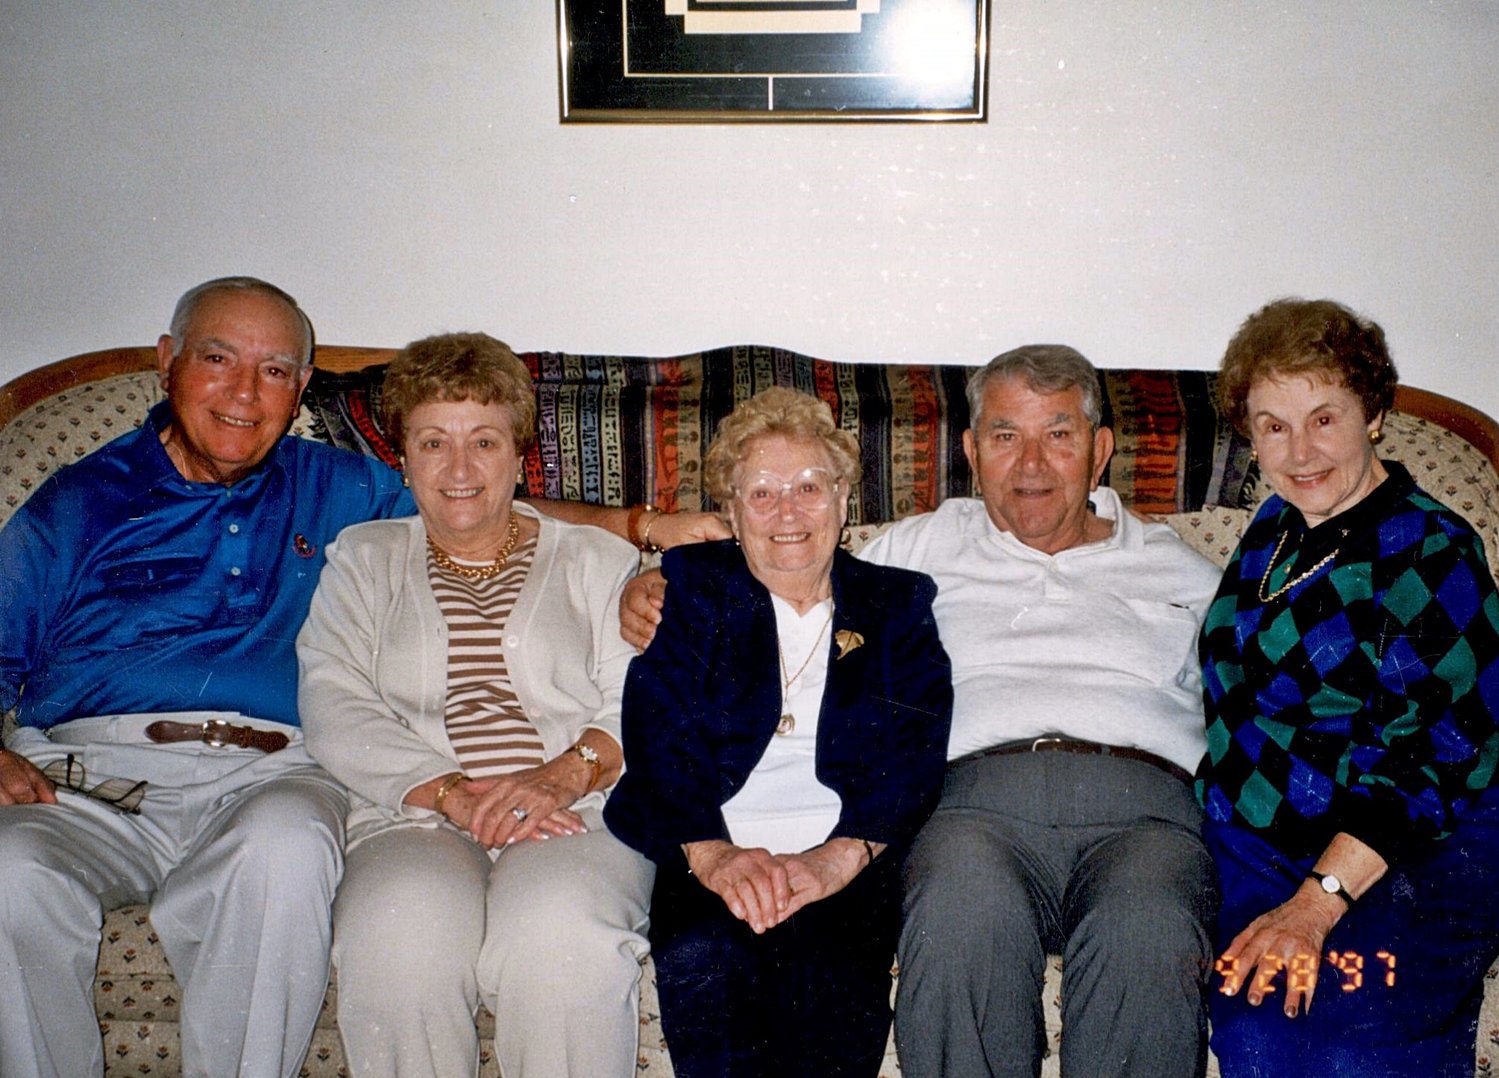 Pictured are (from left to right) Victor "Chet" and Rosie Masiello, Mary and Anthony Iacovelli, and Connie Masiello.